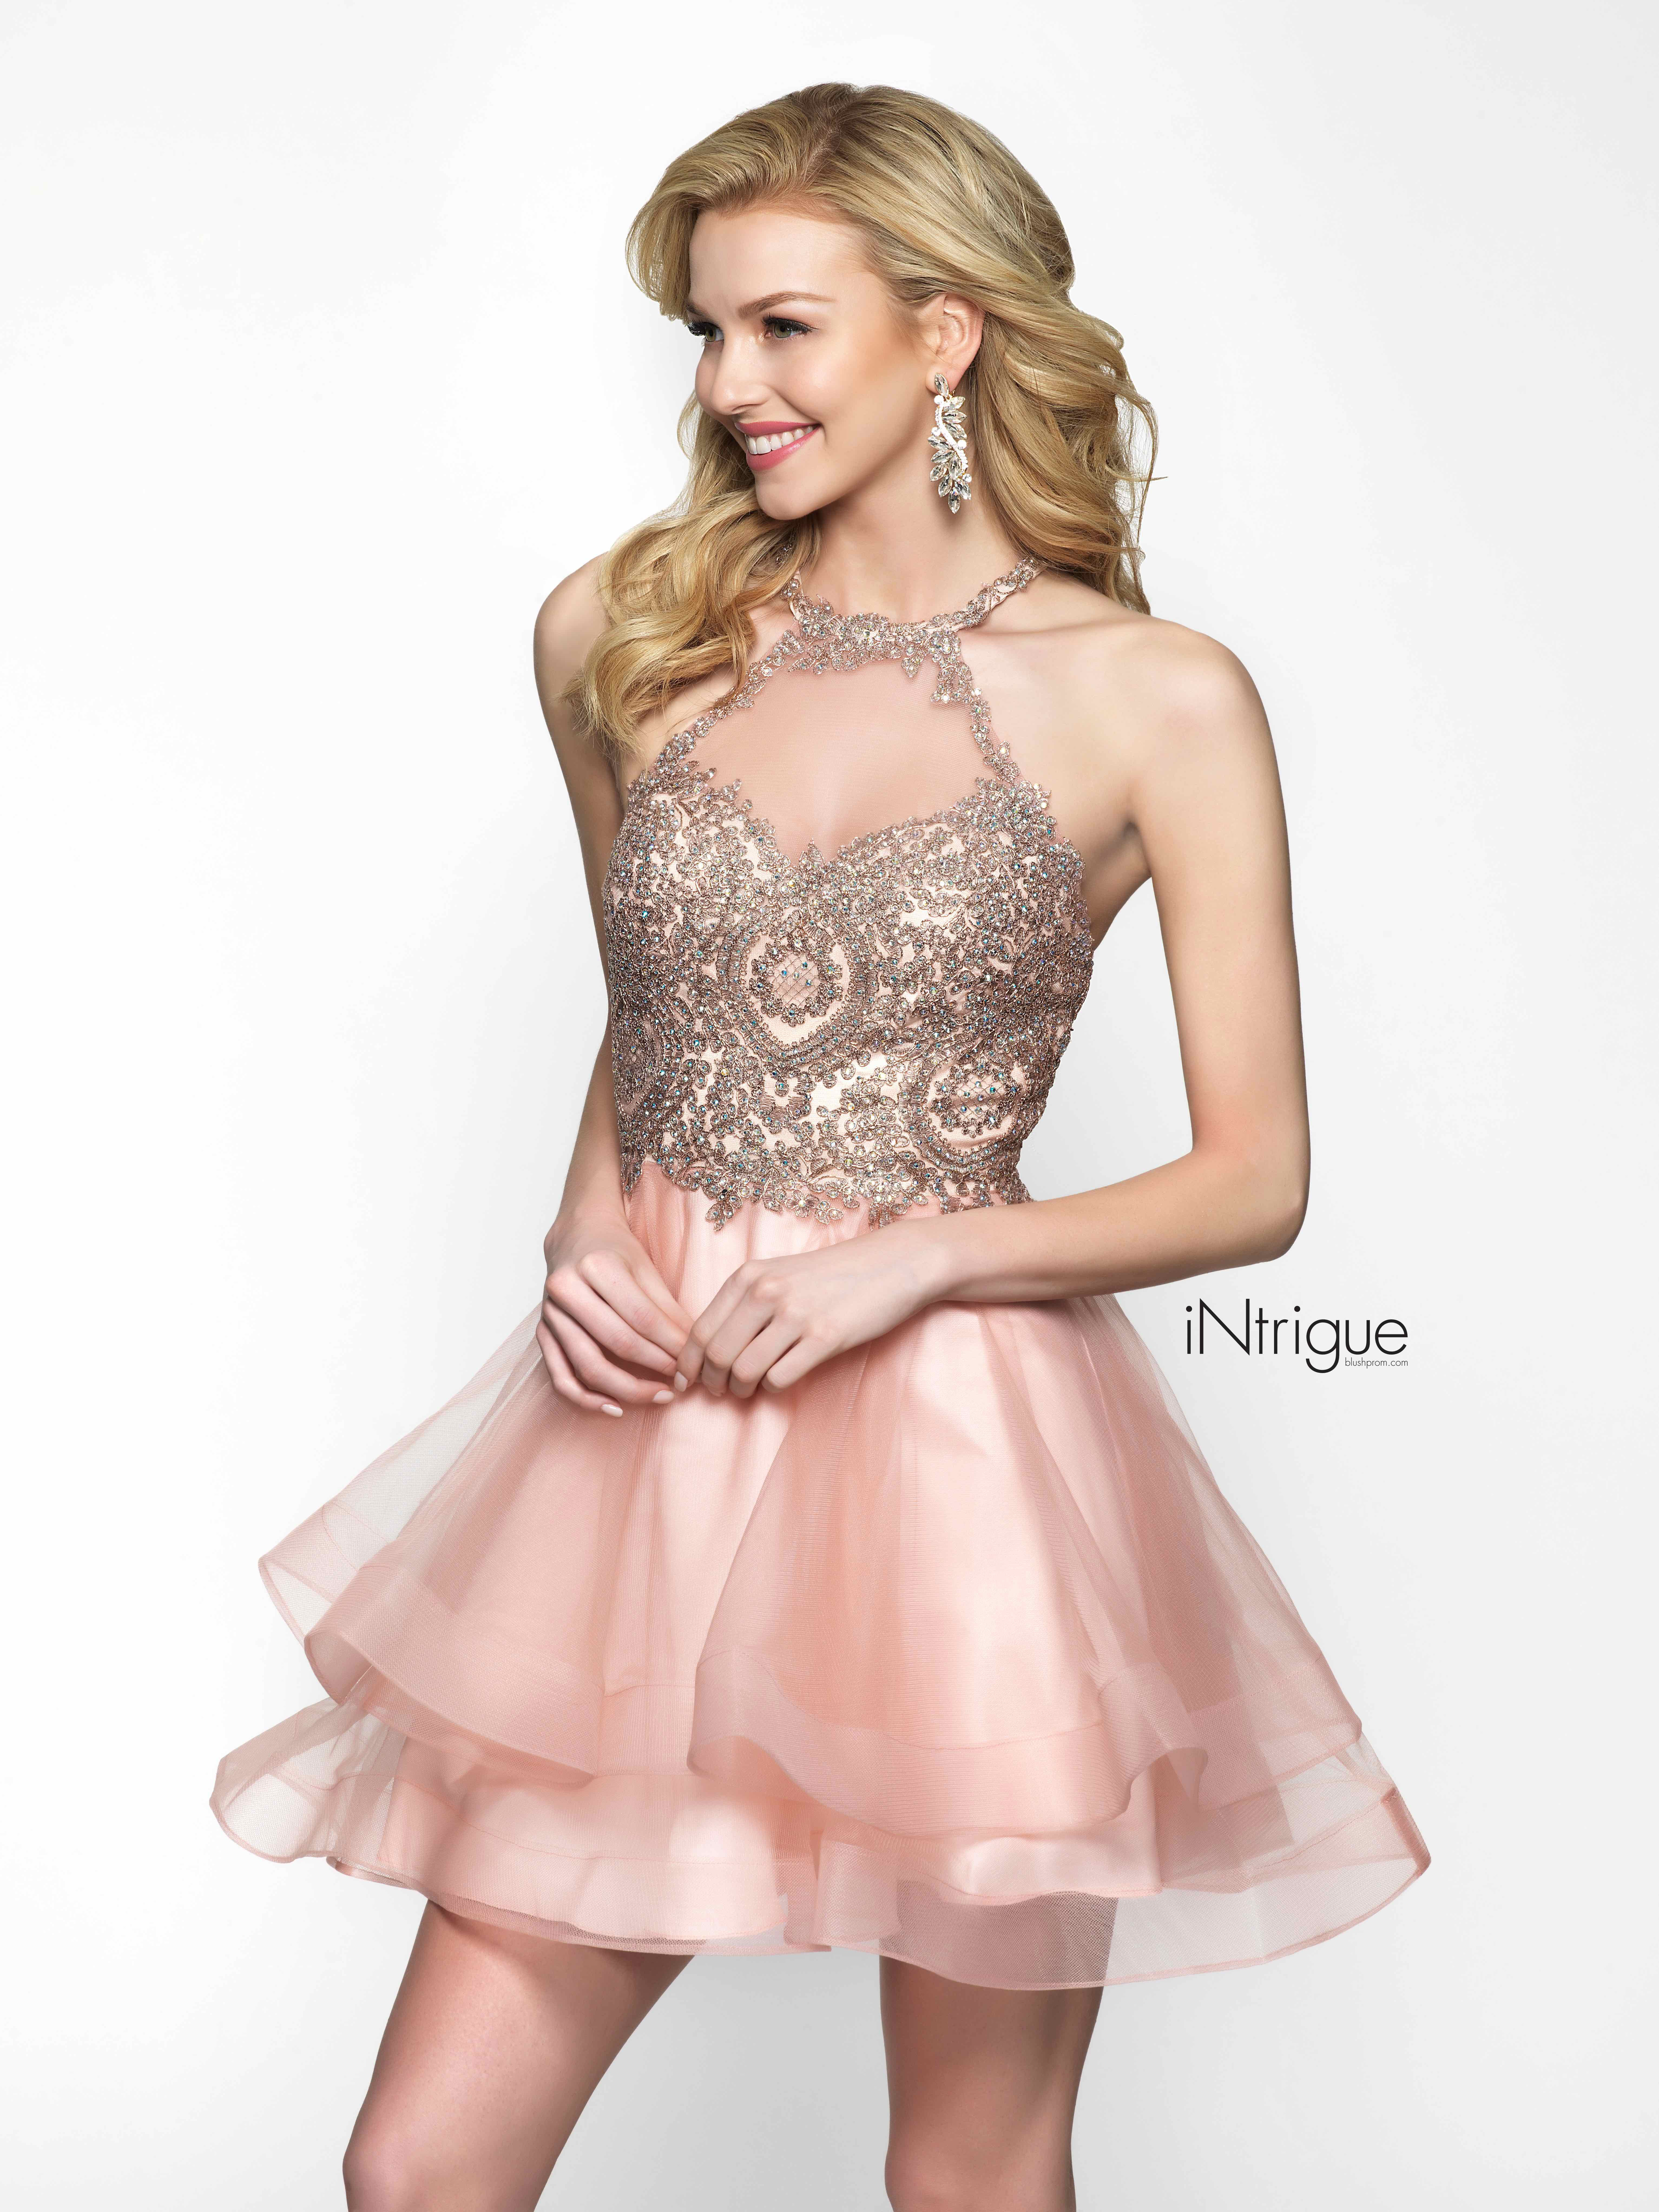 Intrigue by Blush Prom 472